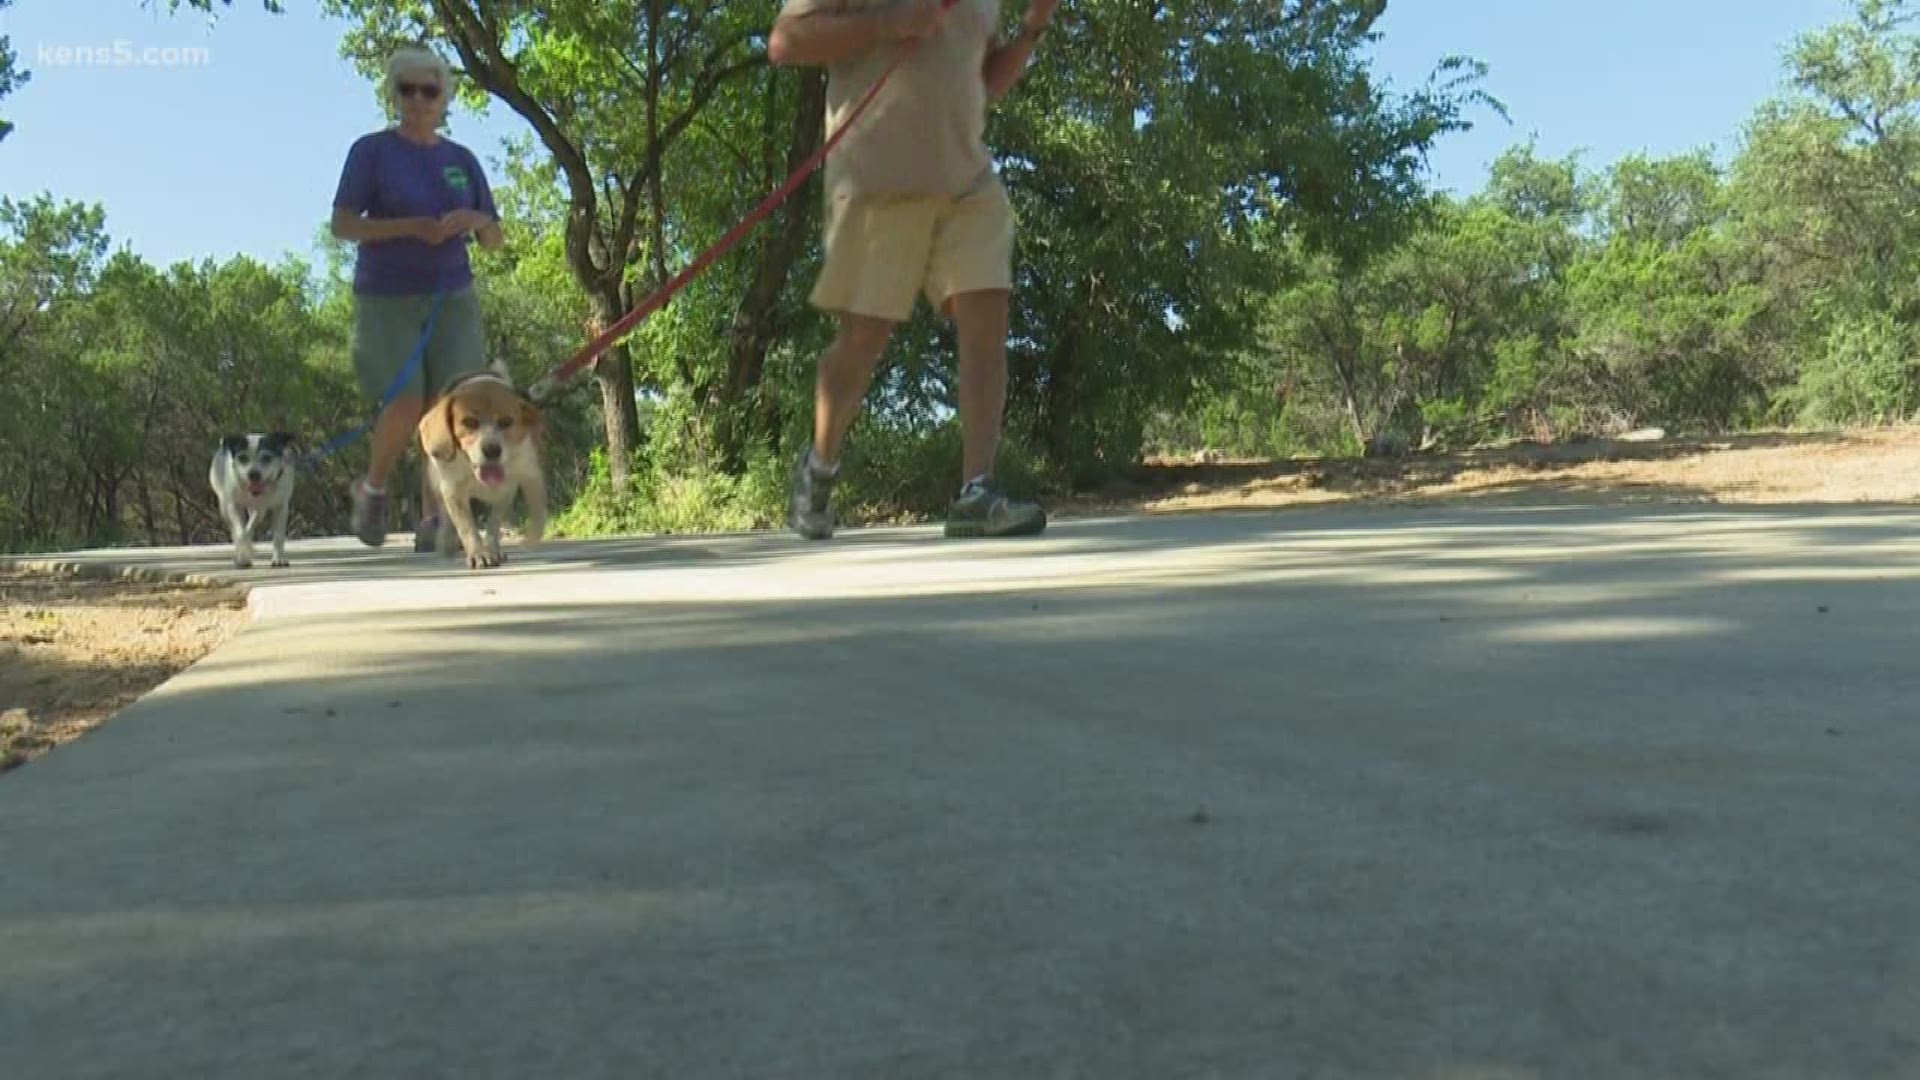 Nearly 70 miles of multi-use trail snake their way through parts of the Alamo City, and city officials are emphasizing that residents work together to keep them clean.